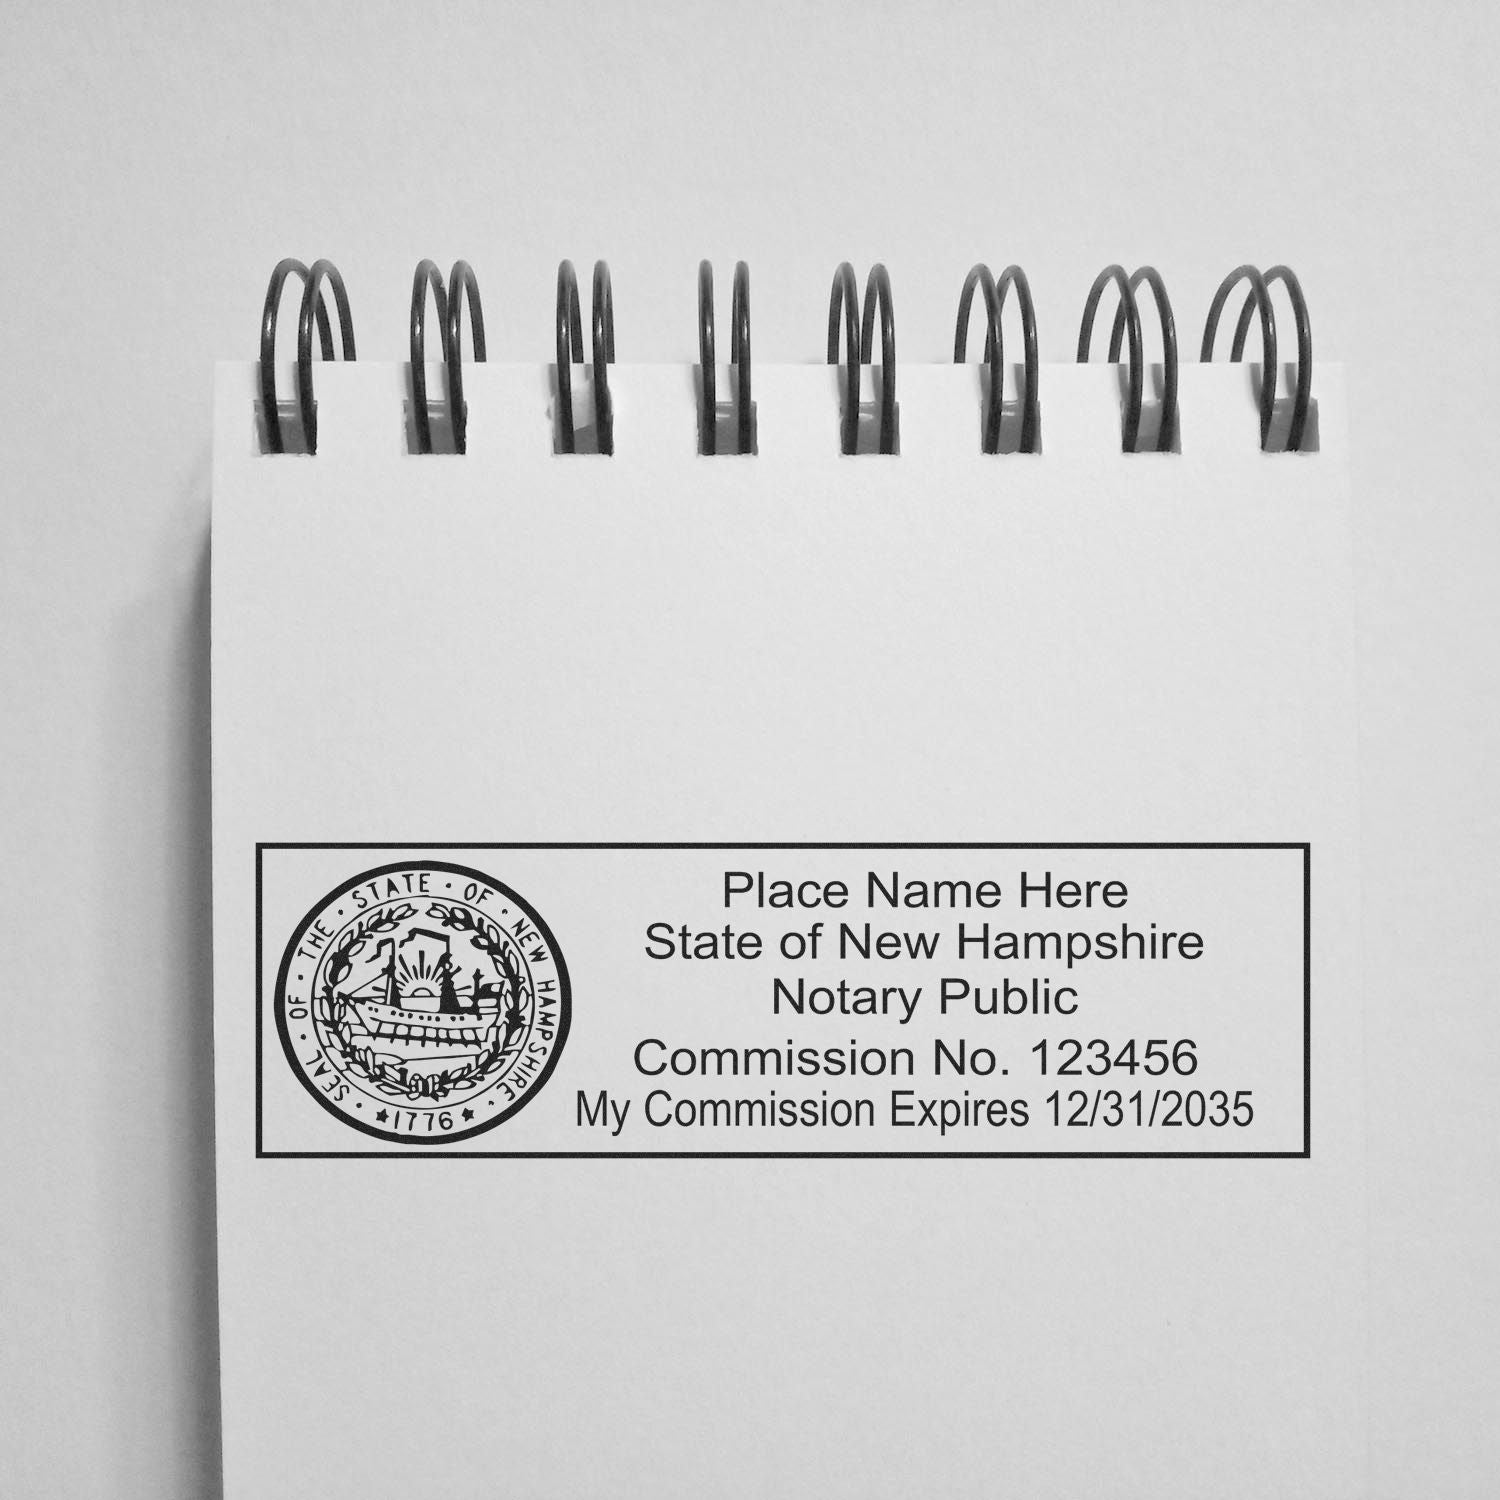 The main image for the MaxLight Premium Pre-Inked New Hampshire State Seal Notarial Stamp depicting a sample of the imprint and electronic files